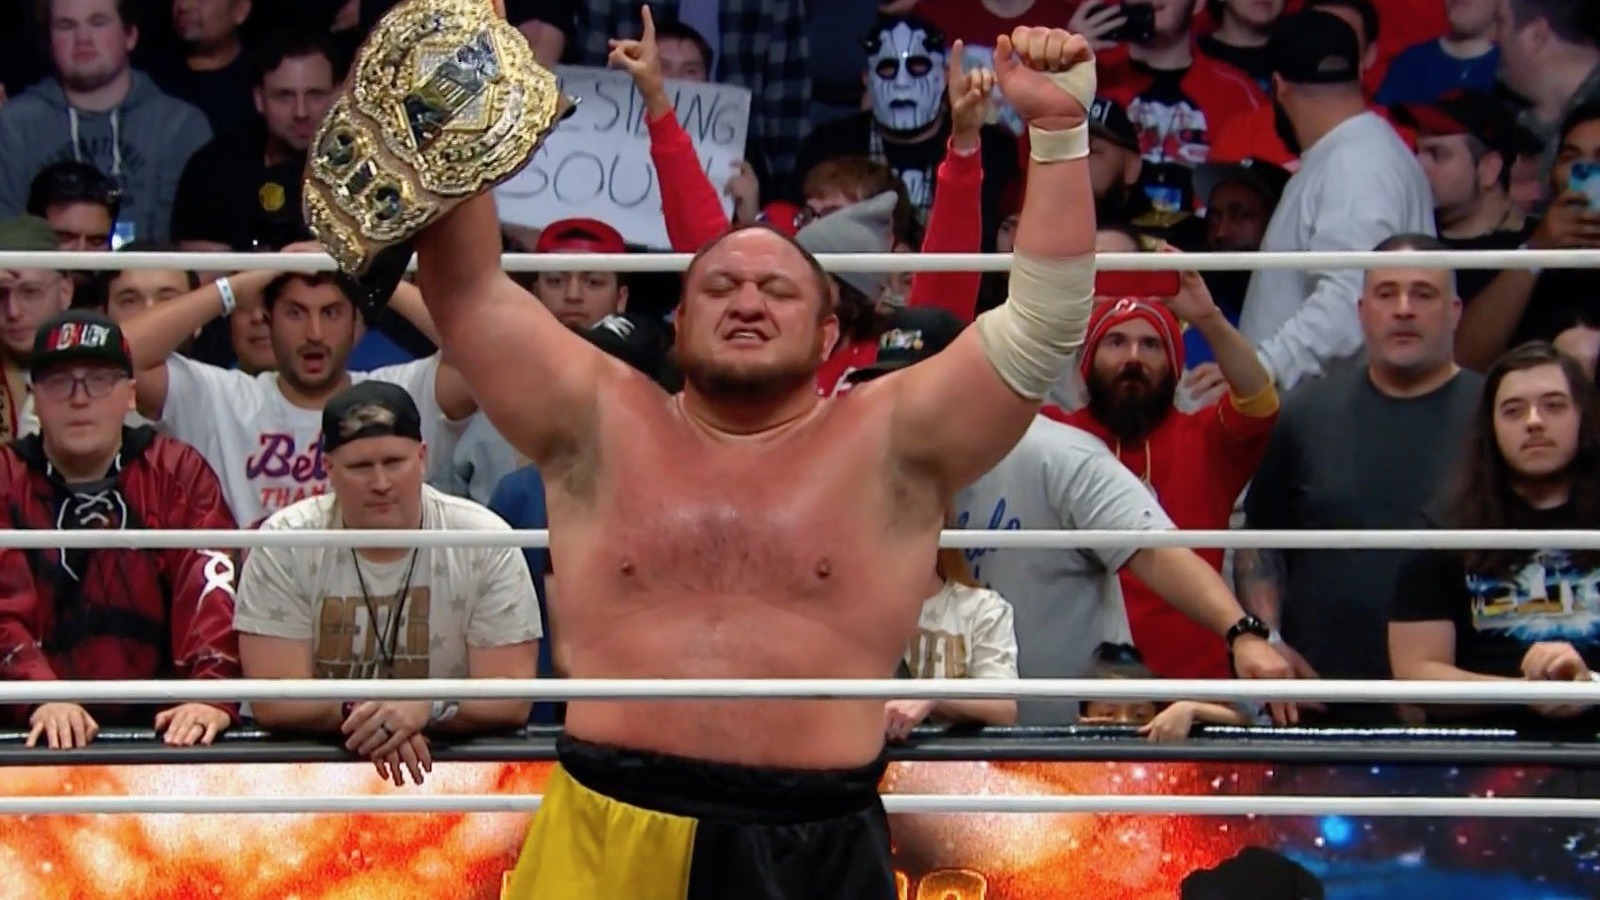 Samoa Joe Wins AEW World Title At Worlds End, MJF's Historic Reign Ends